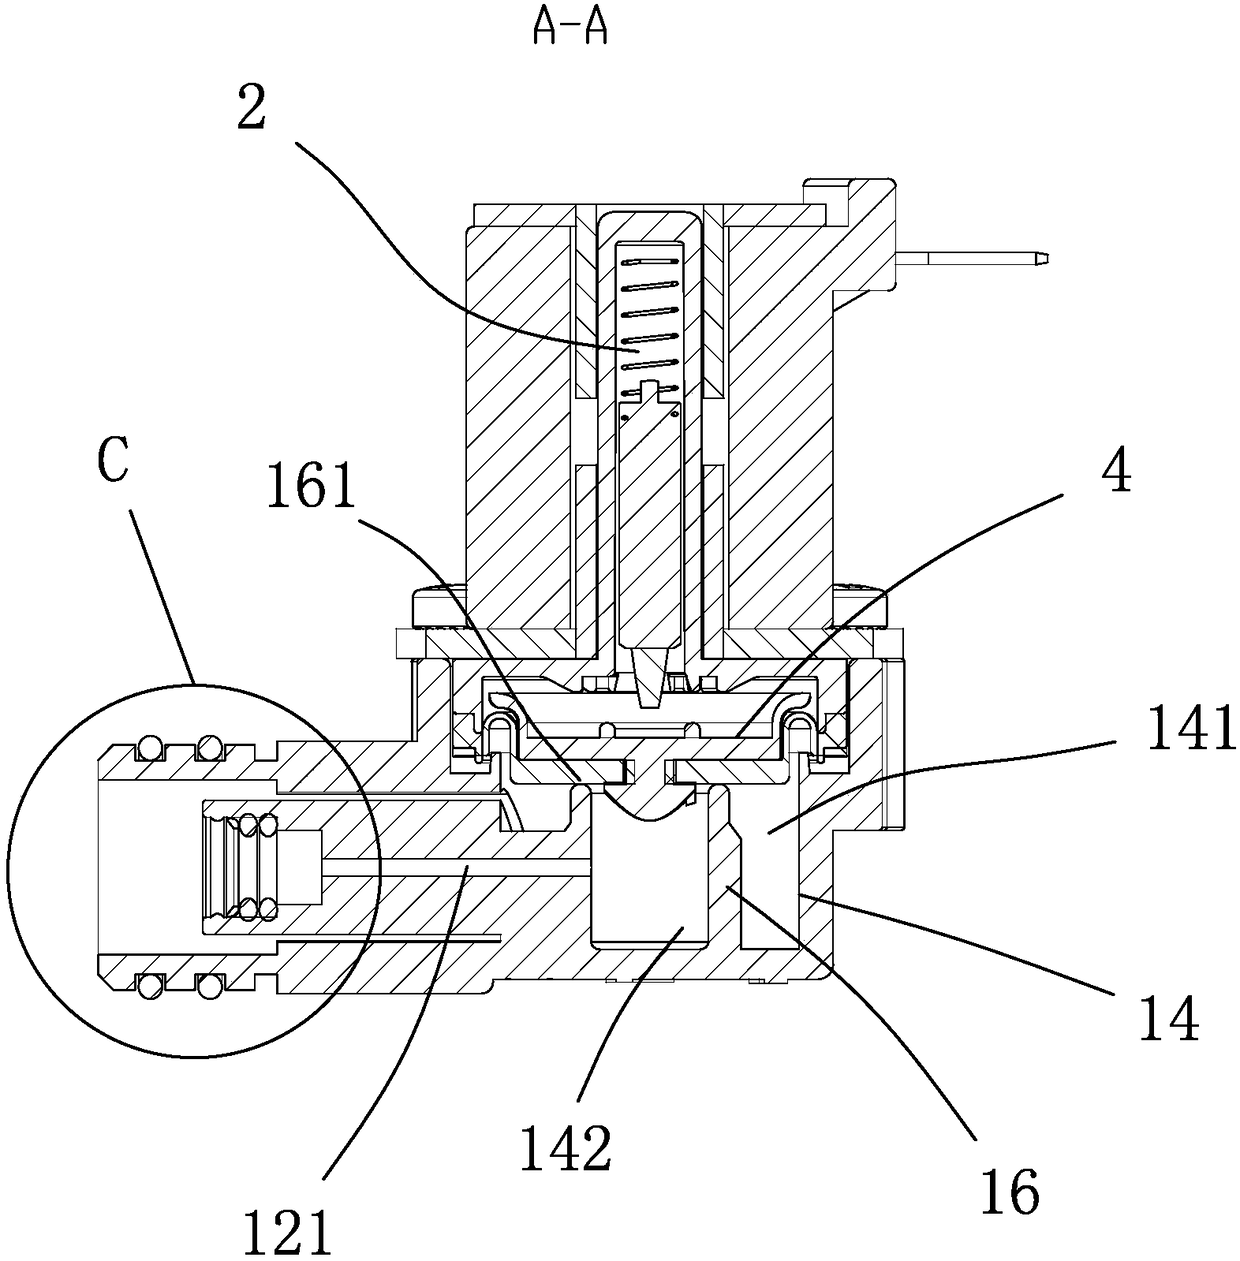 Solenoid valve with compact structure